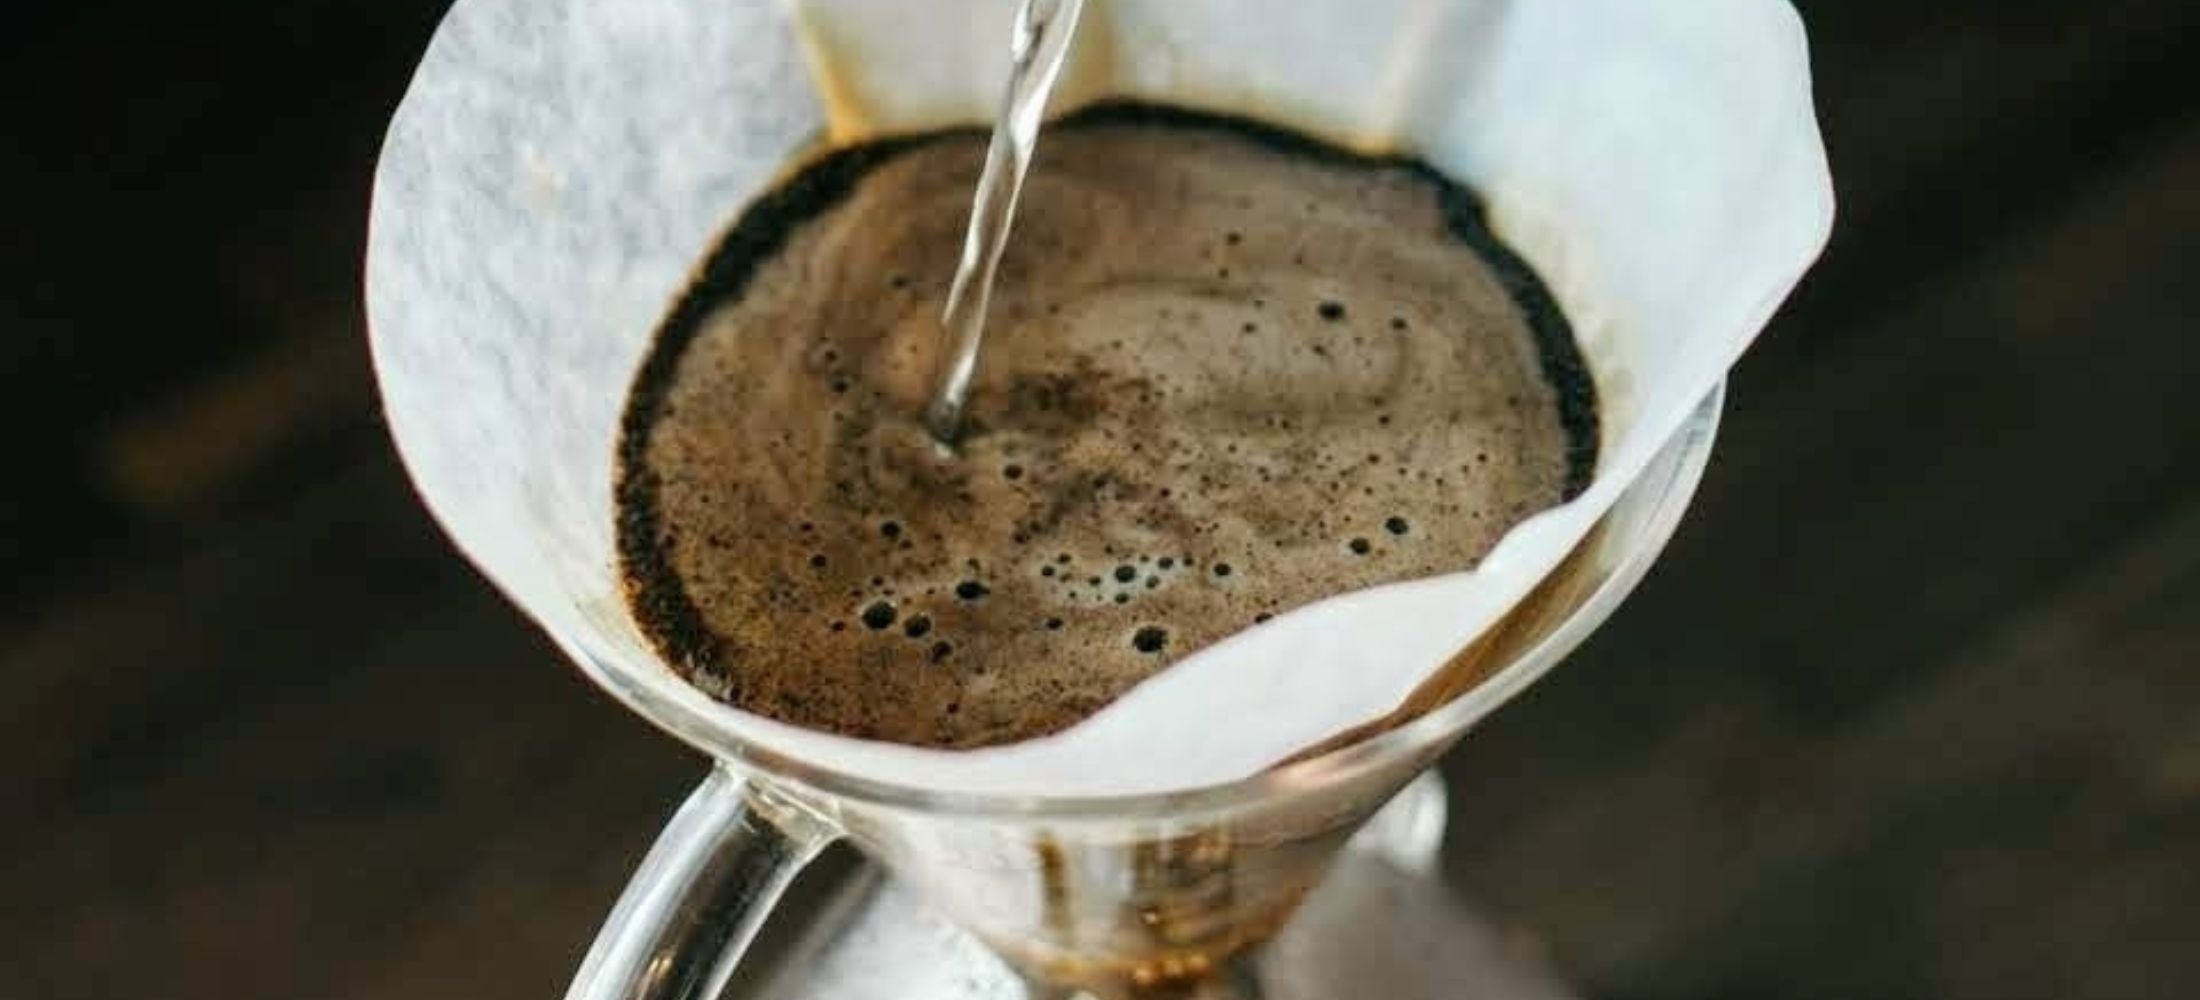 Brewed vs Drip Coffee: Ultimate Guide to Flavor & Technique